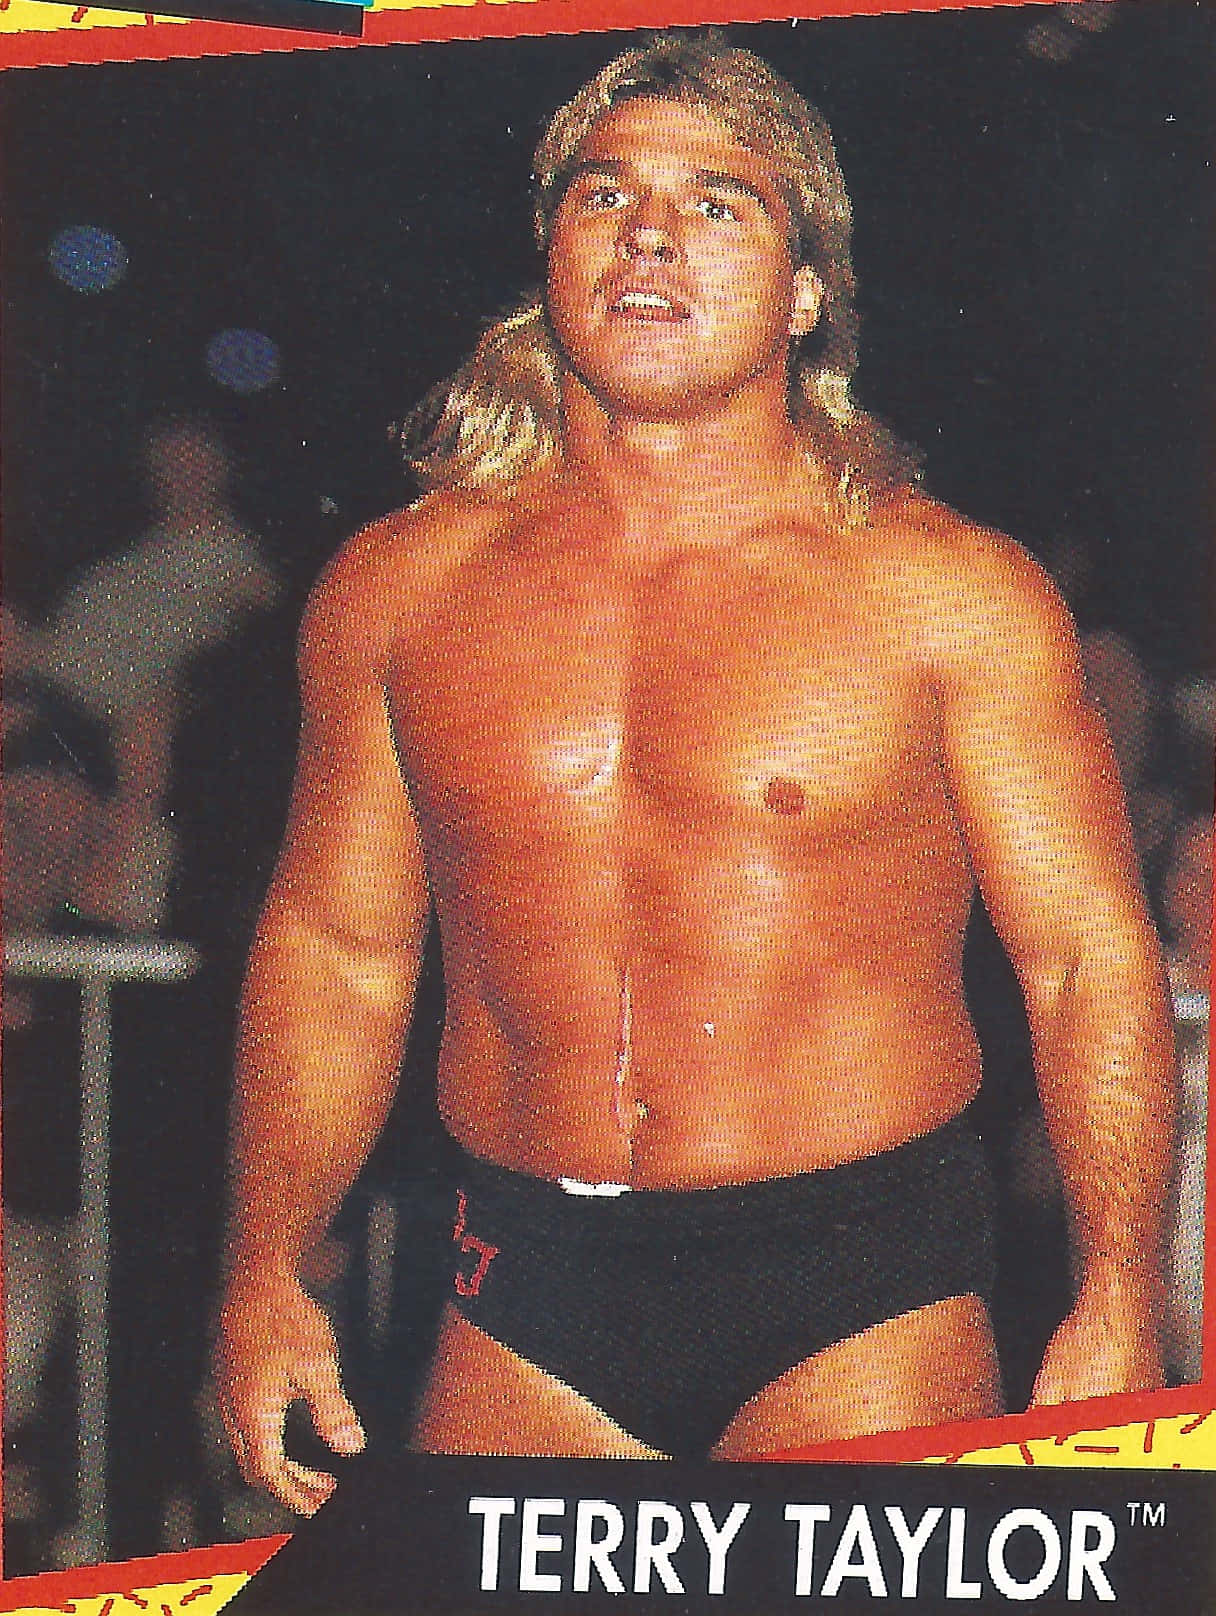 Terry Taylor 1216 X 1616 Wallpaper